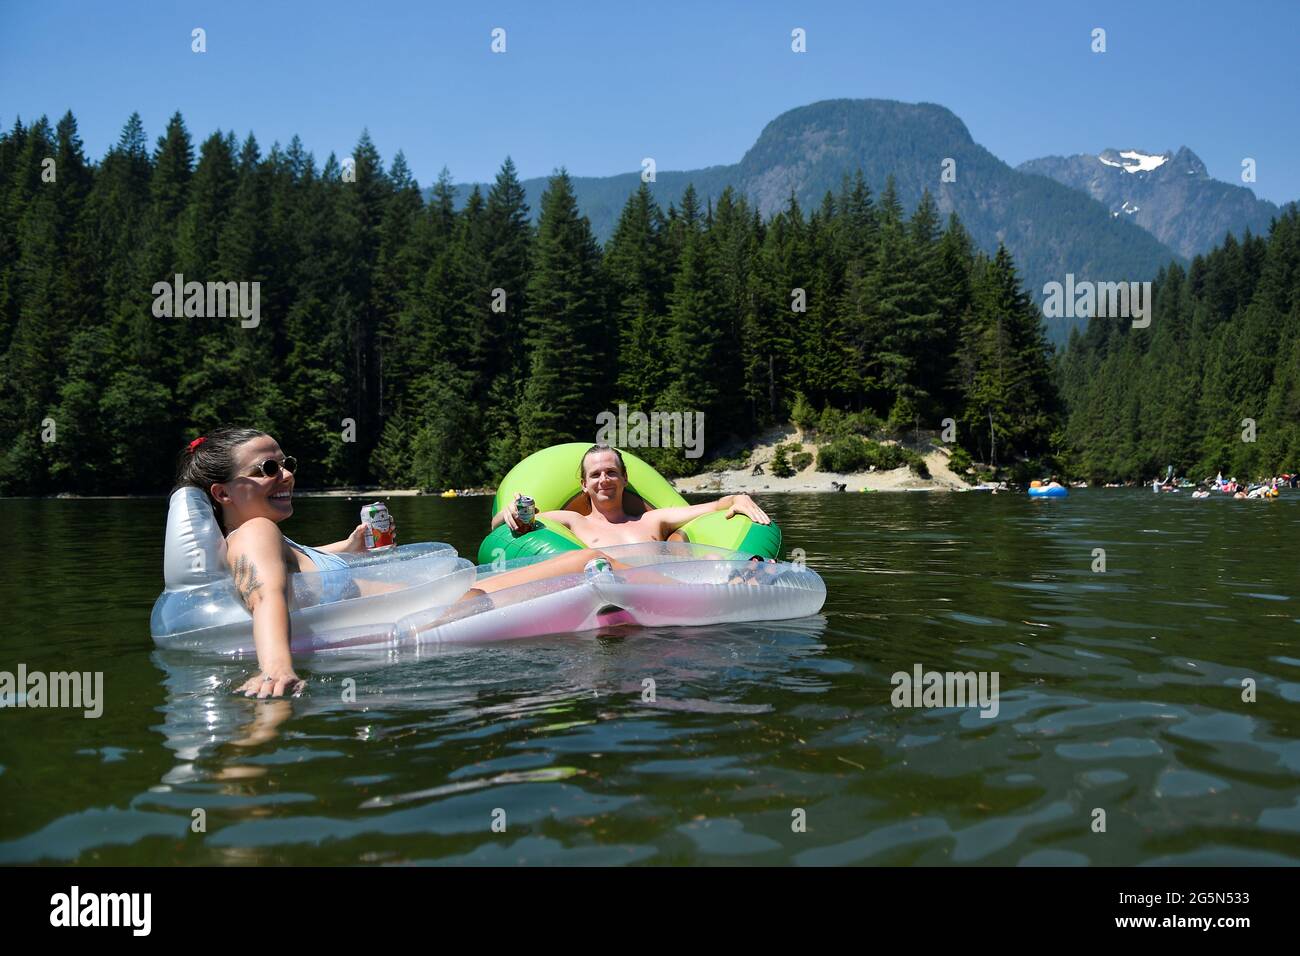 People headed to Alouette Lake to cool off during the scorching weather of a heatwave in Maple Ridge, British Columbia, Canada June 28, 2021. REUTERS/Jennifer Gauthier Stock Photo